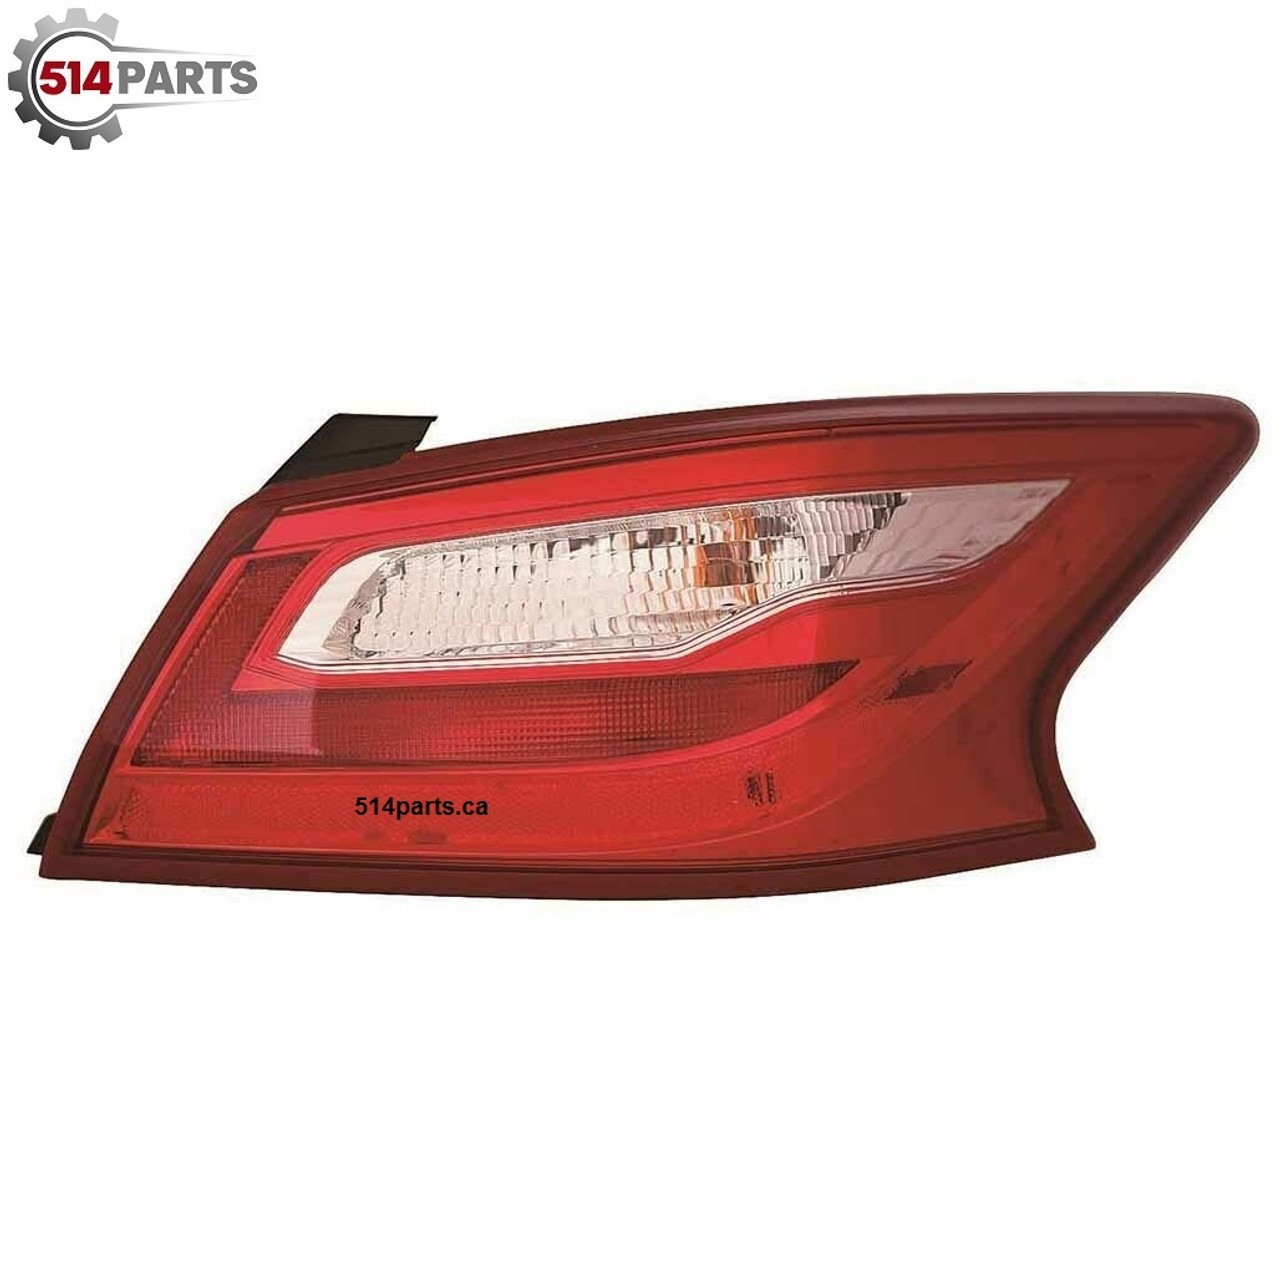 2016 - 2017 NISSAN ALTIMA ALL MODELS EXCLUDE SR TAIL LIGHTS High Quality - PHARES ARRIERE pour TOUS LES MODELES EXCLUENT SR Haute Qualite